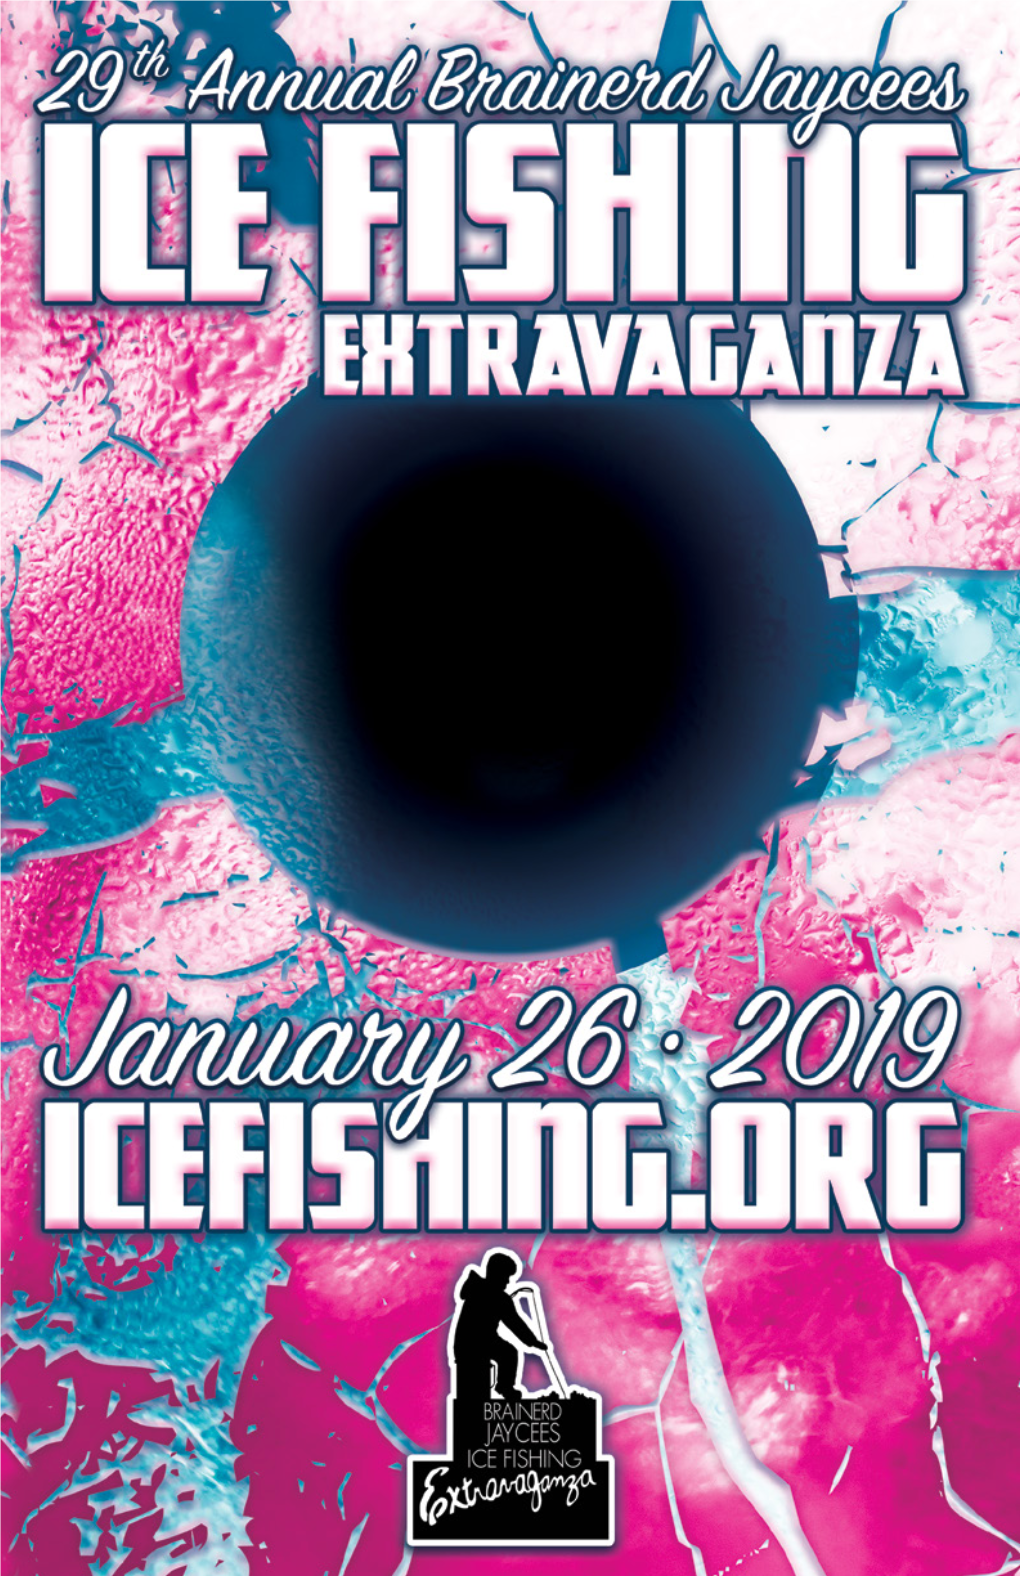 The Ice Fishing Extravaganza Has Always Been to Have an Impact on the Community by Supporting Charitable Organizations and Causes